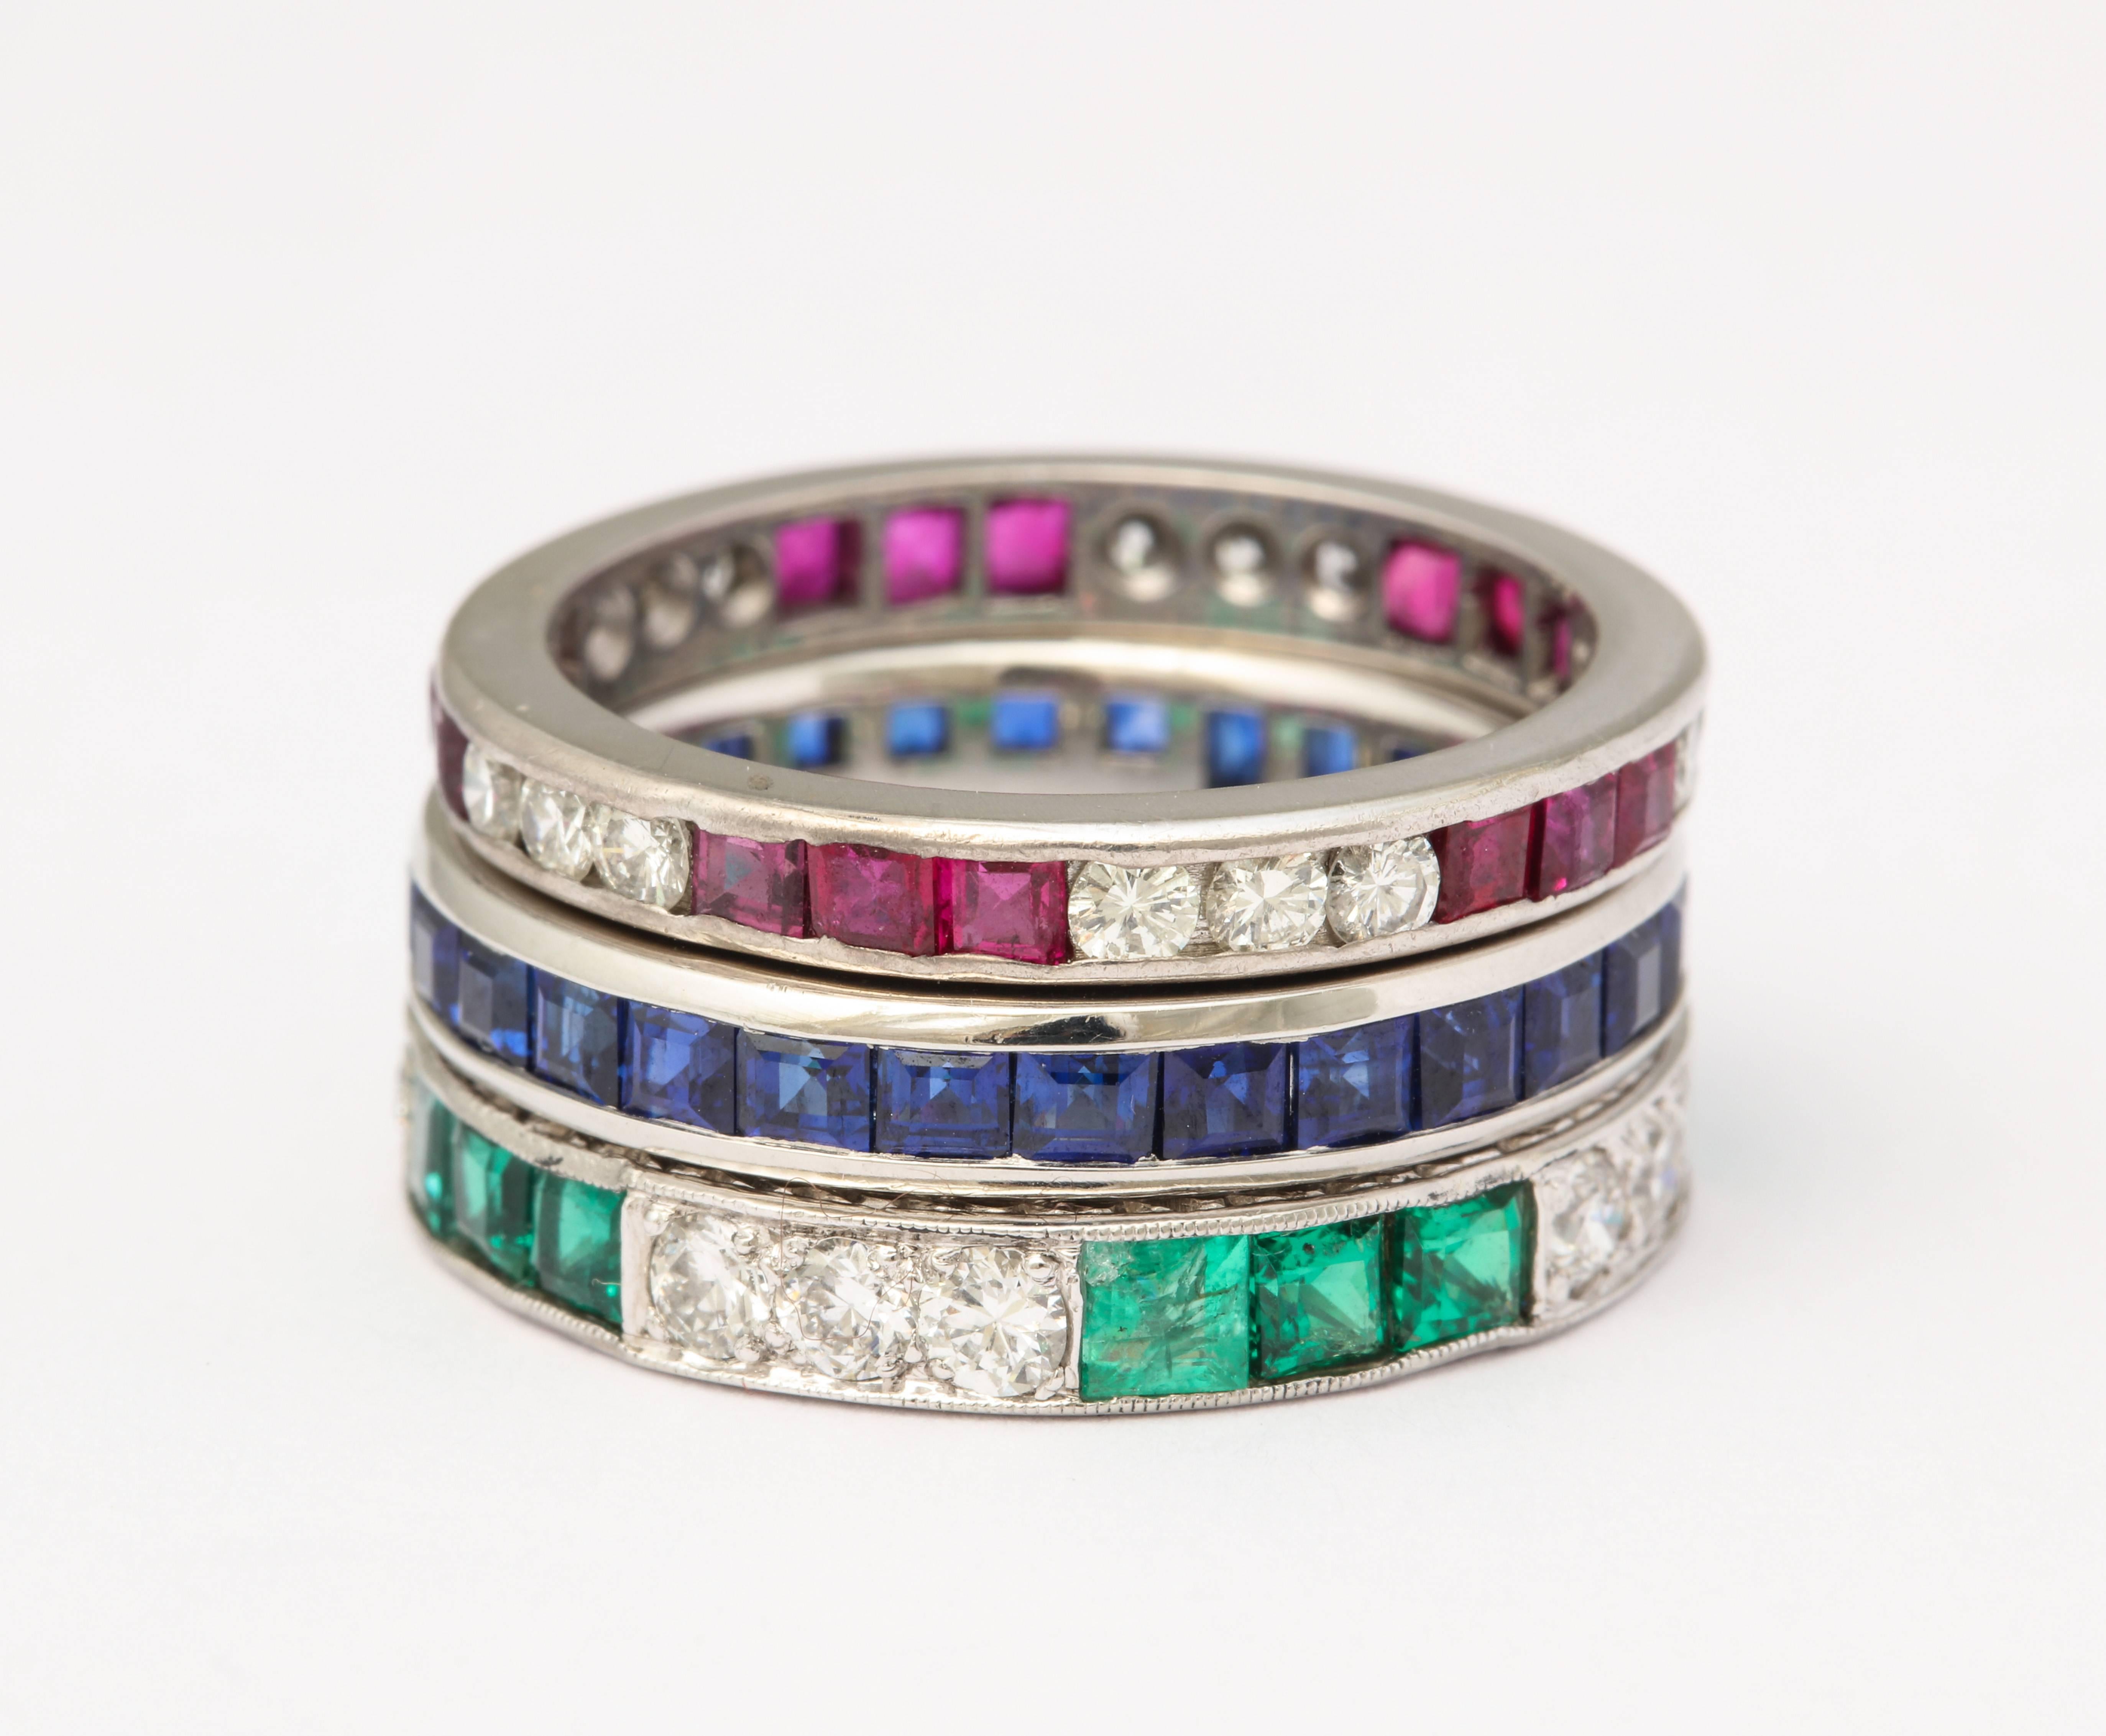 Women's Wedding Bands of Diamonds, Sapphires, Rubies and Emeralds Set in Platinum